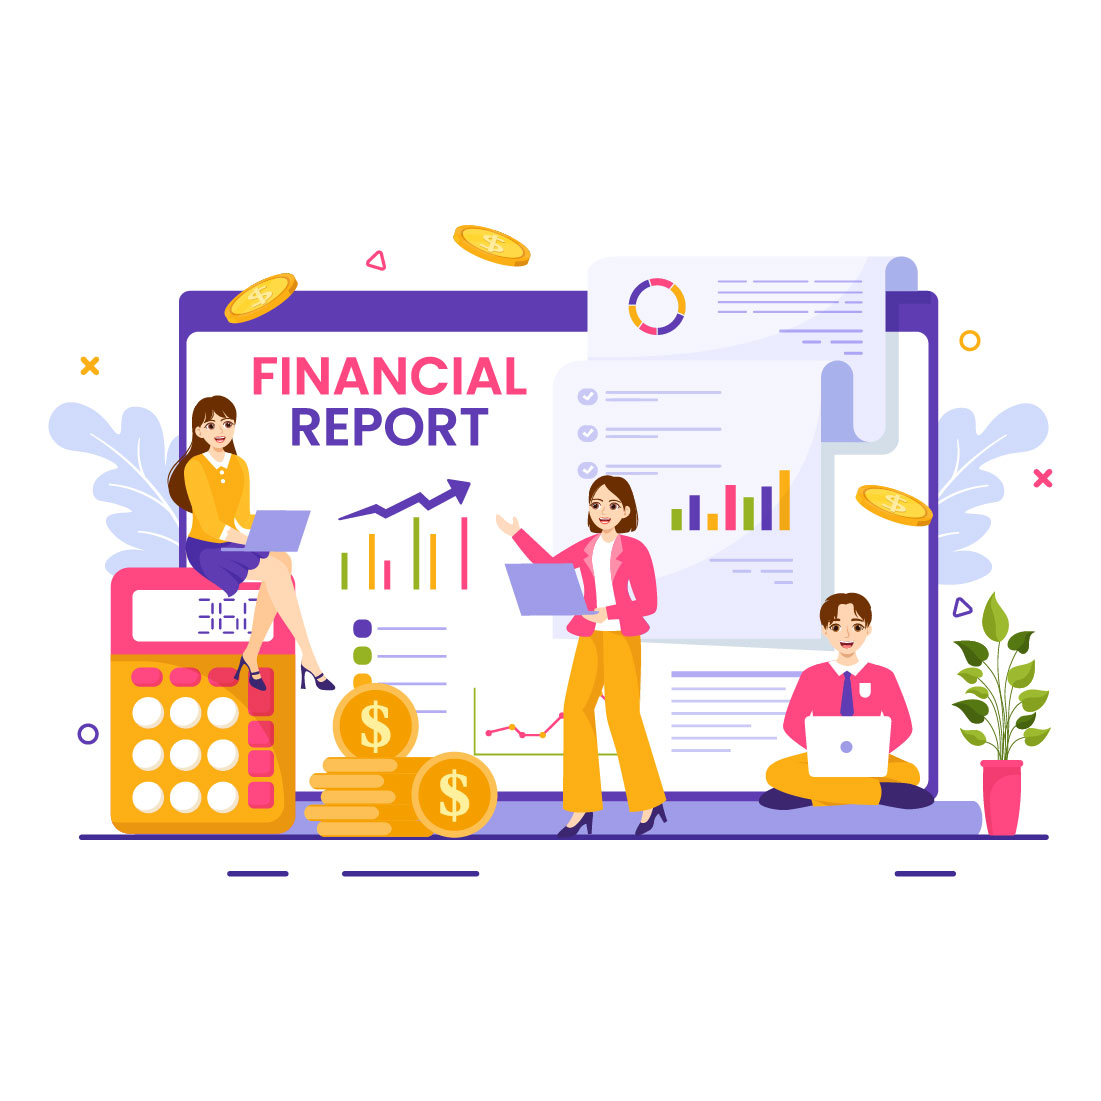 12 Financial Report Illustration cover image.